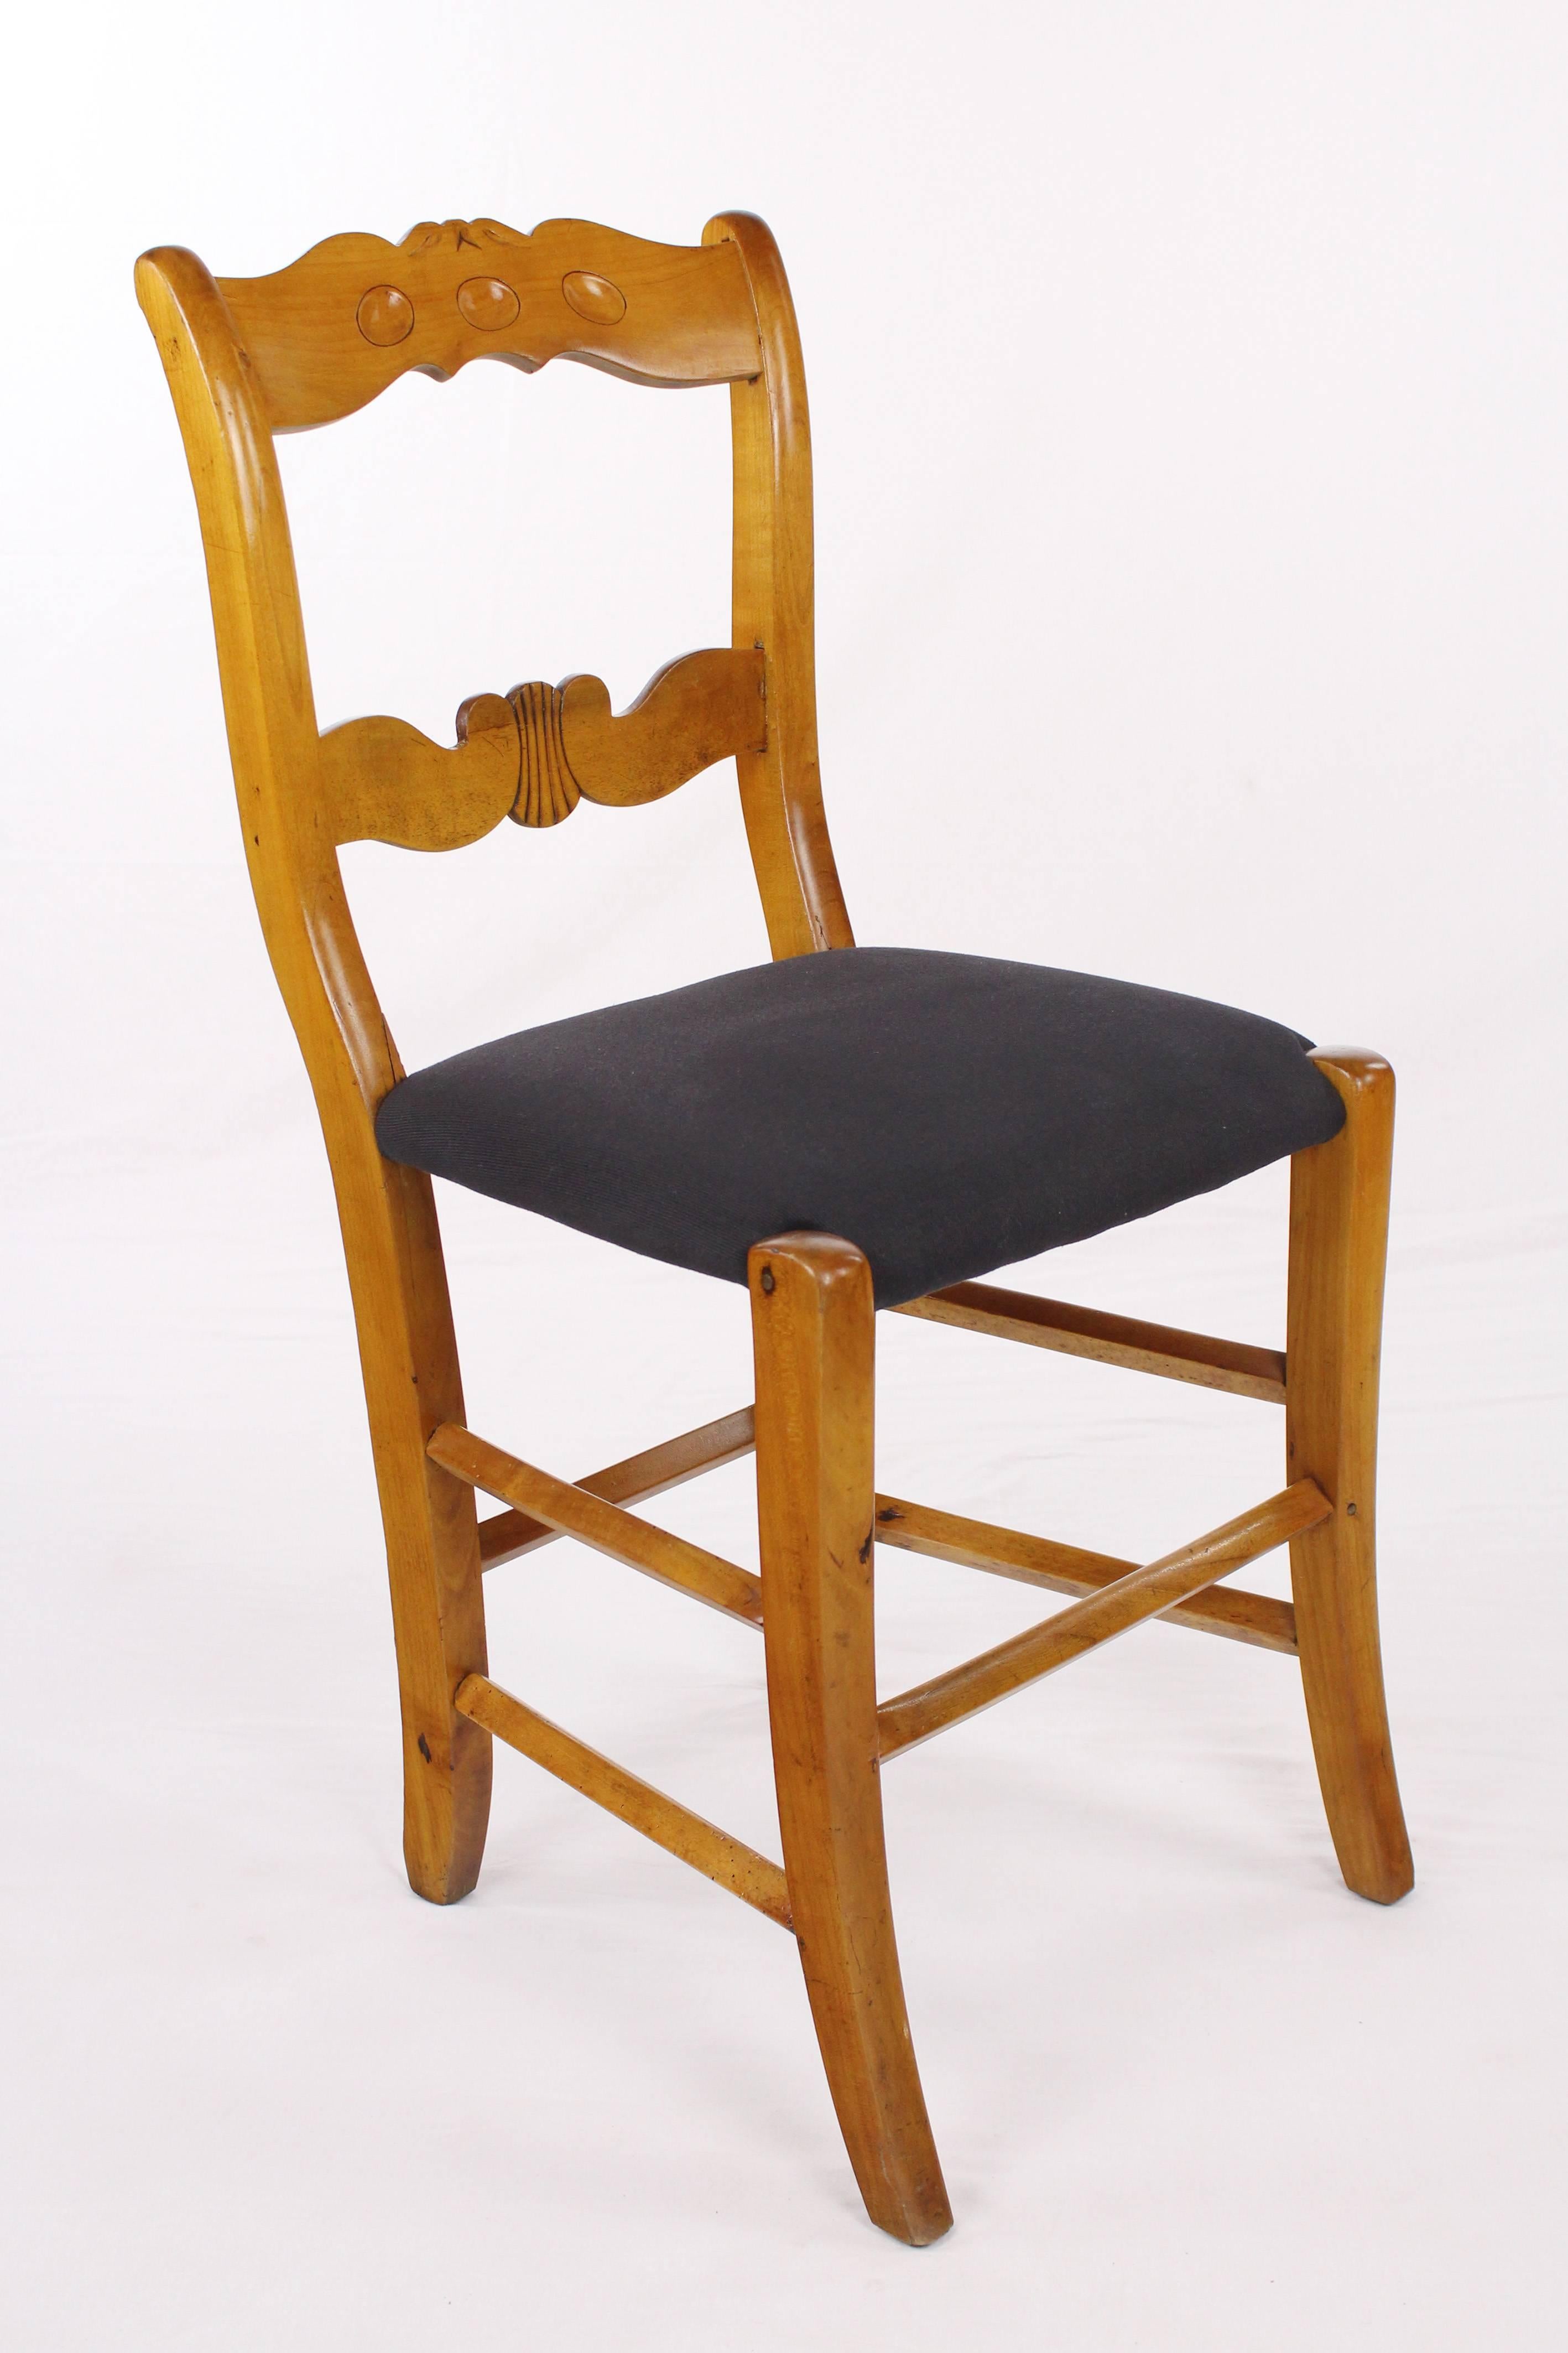 Set of 4 rustic Biedermeier Period Chairs, Germany circa 1830 Massive Cherrywood For Sale 4